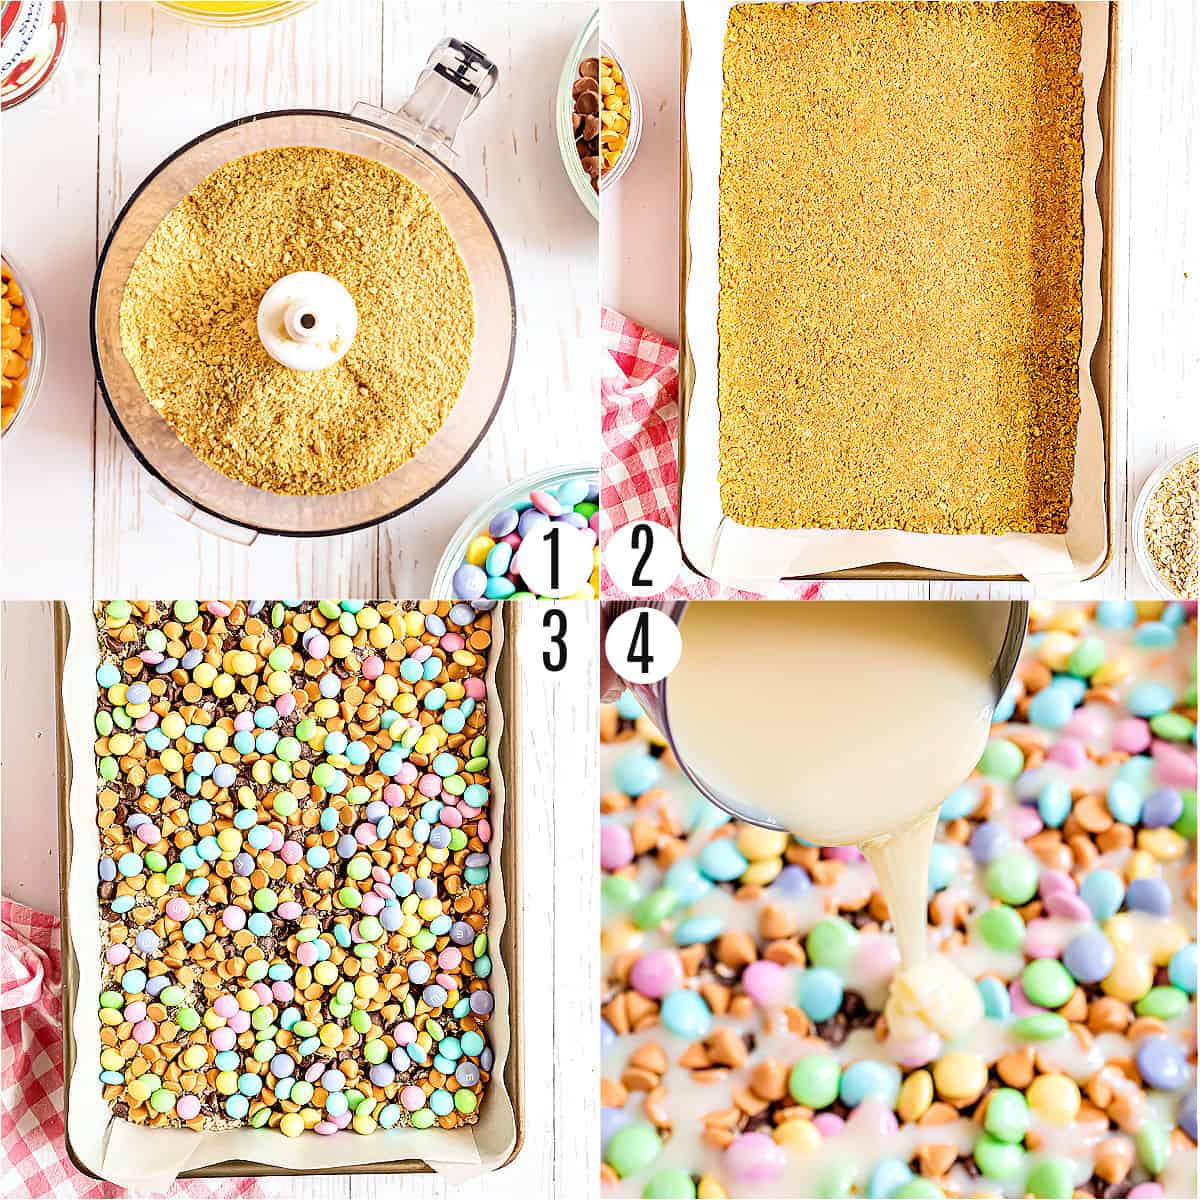 Step by step photos showing how to make magic cookie bars.